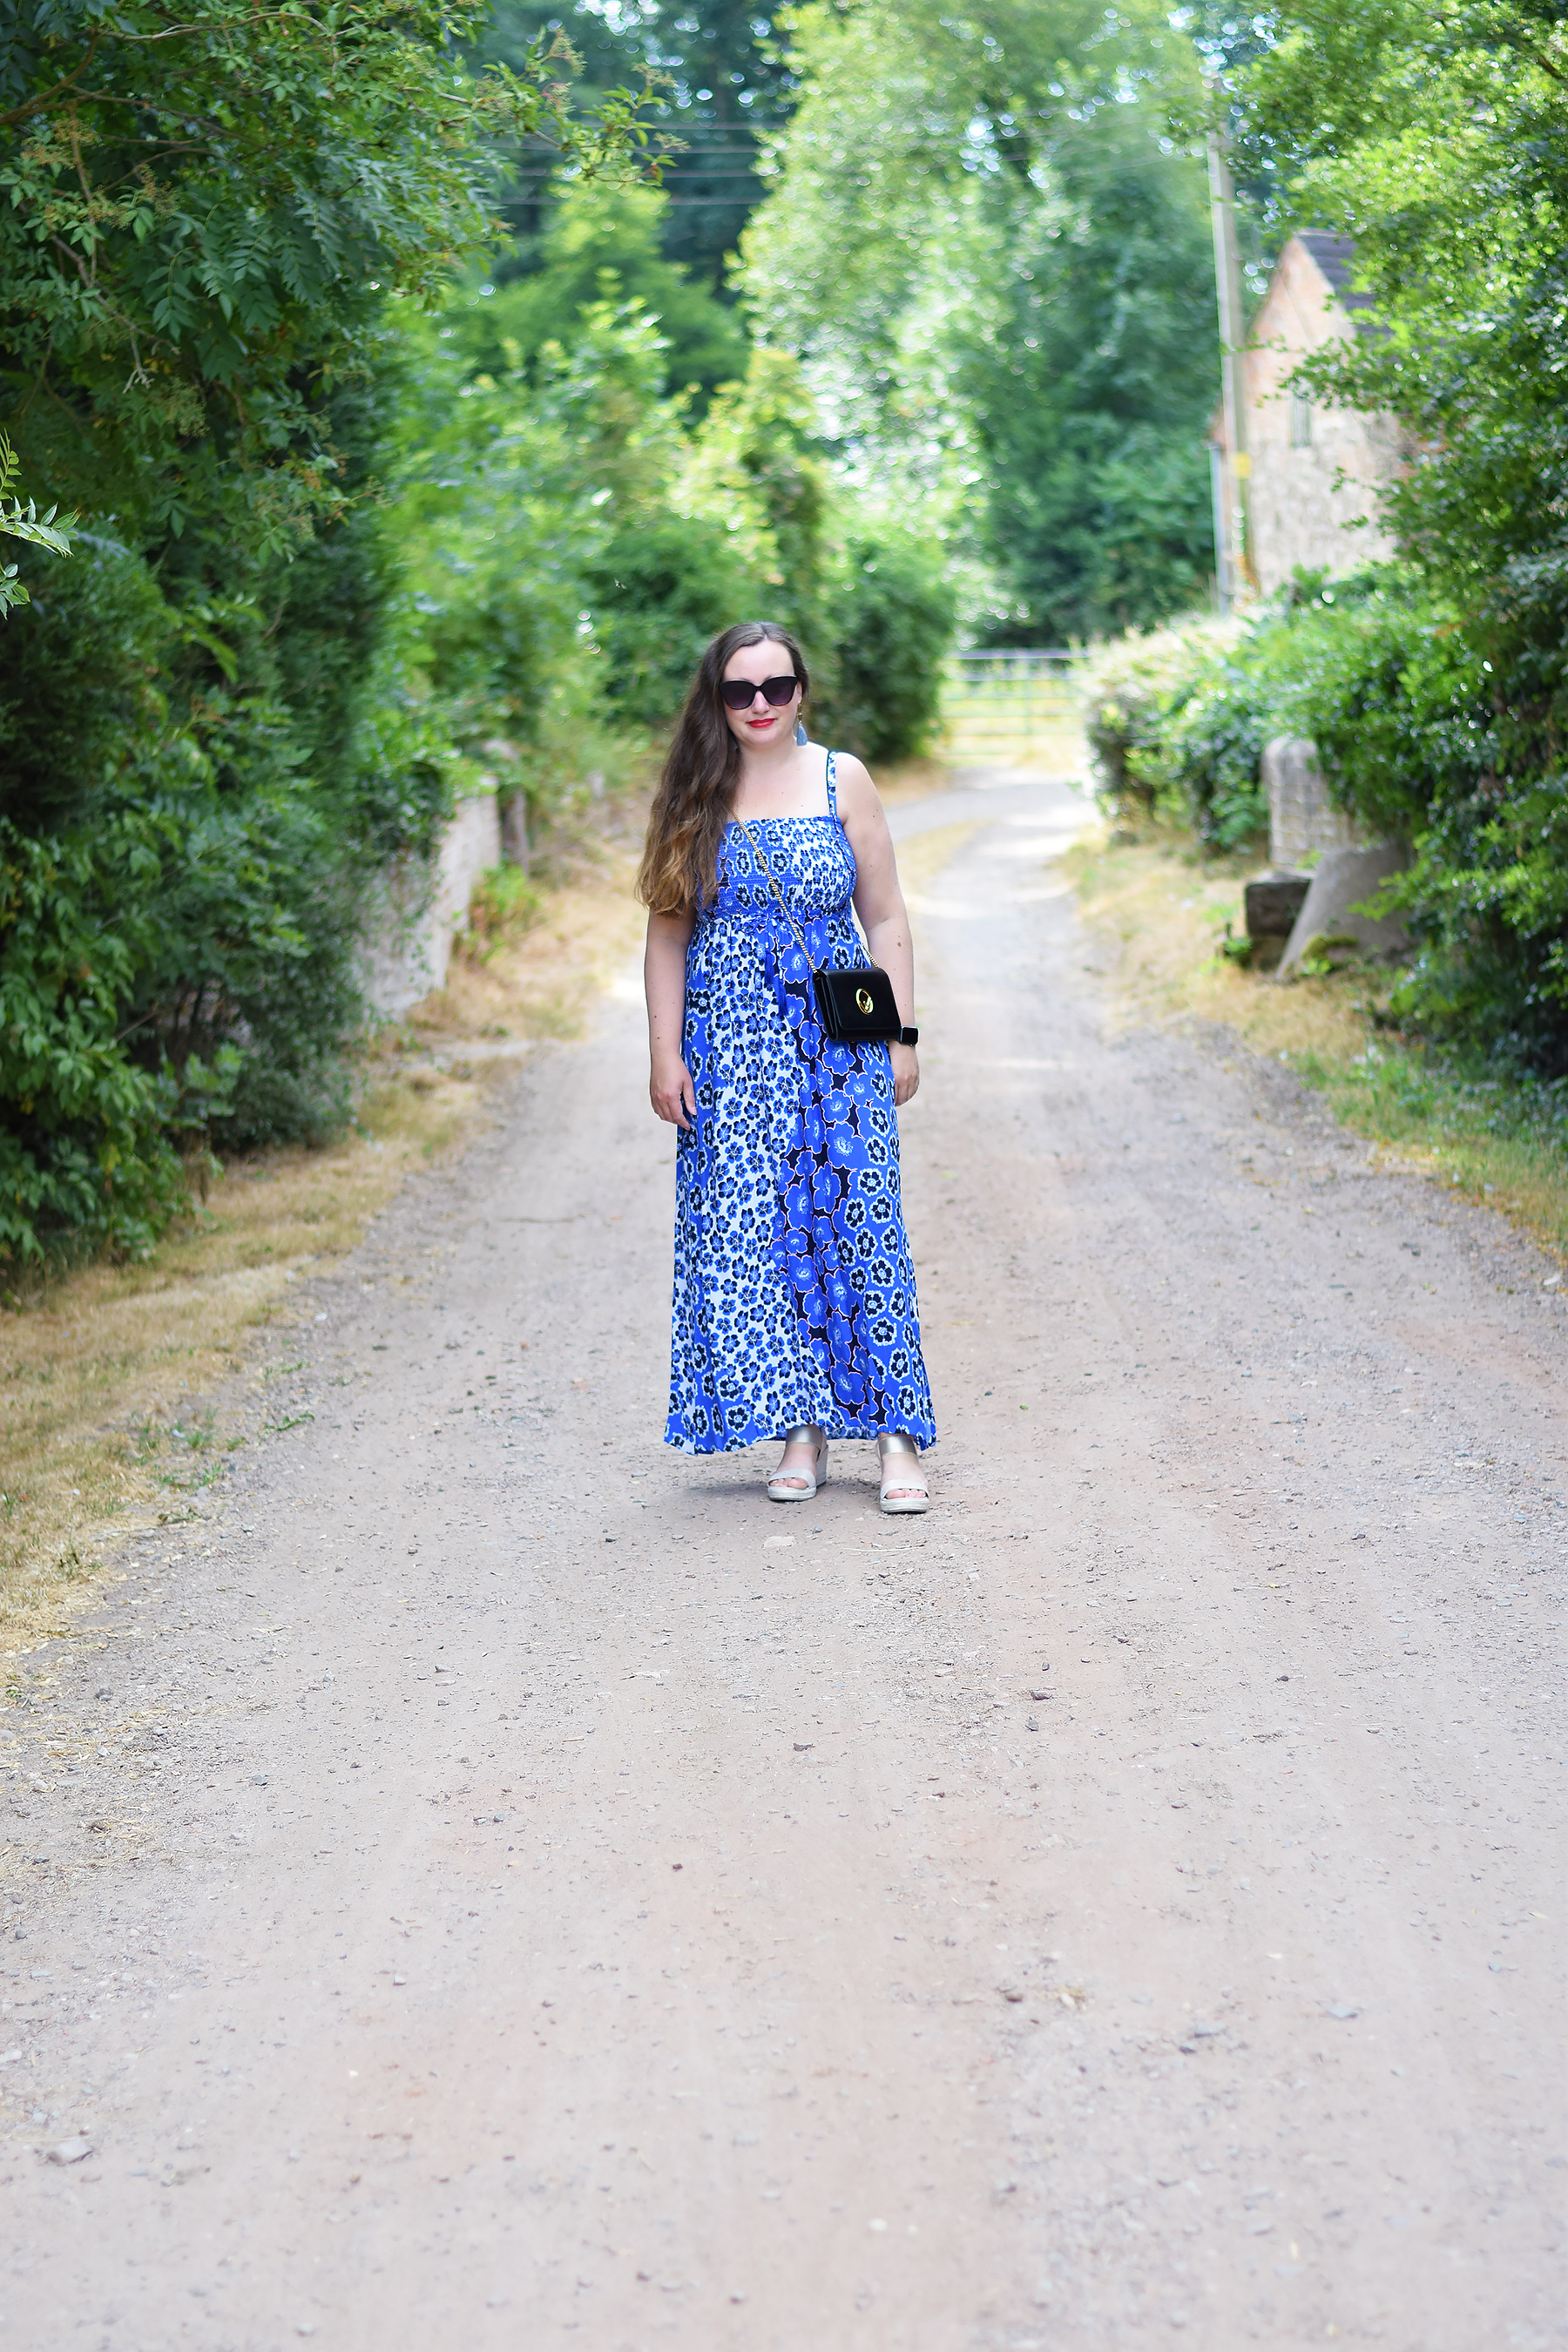 Bright blue floral maxi dress outfit